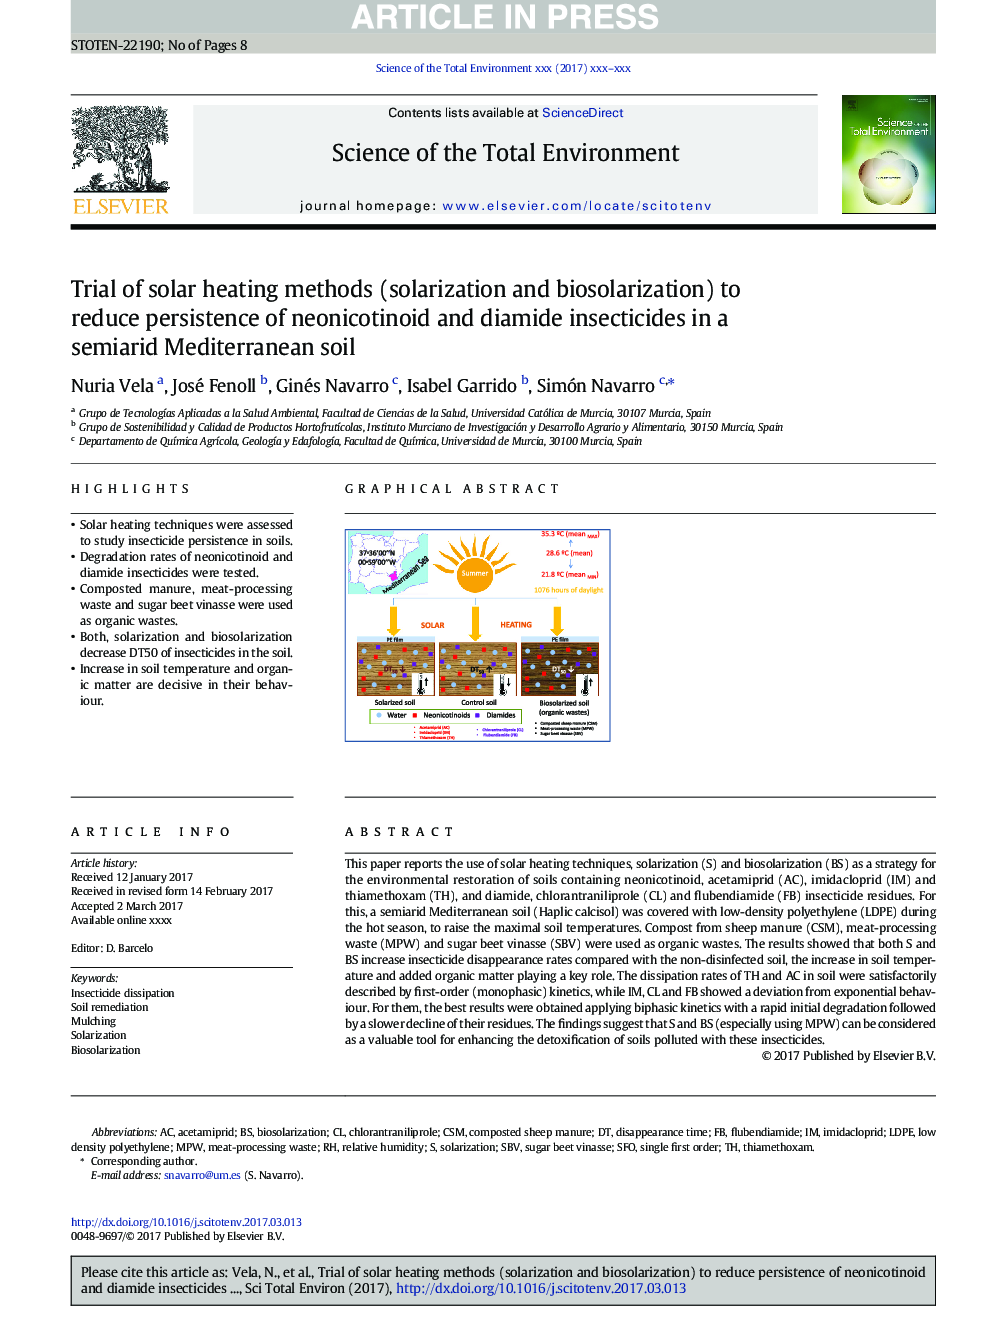 Trial of solar heating methods (solarization and biosolarization) to reduce persistence of neonicotinoid and diamide insecticides in a semiarid Mediterranean soil